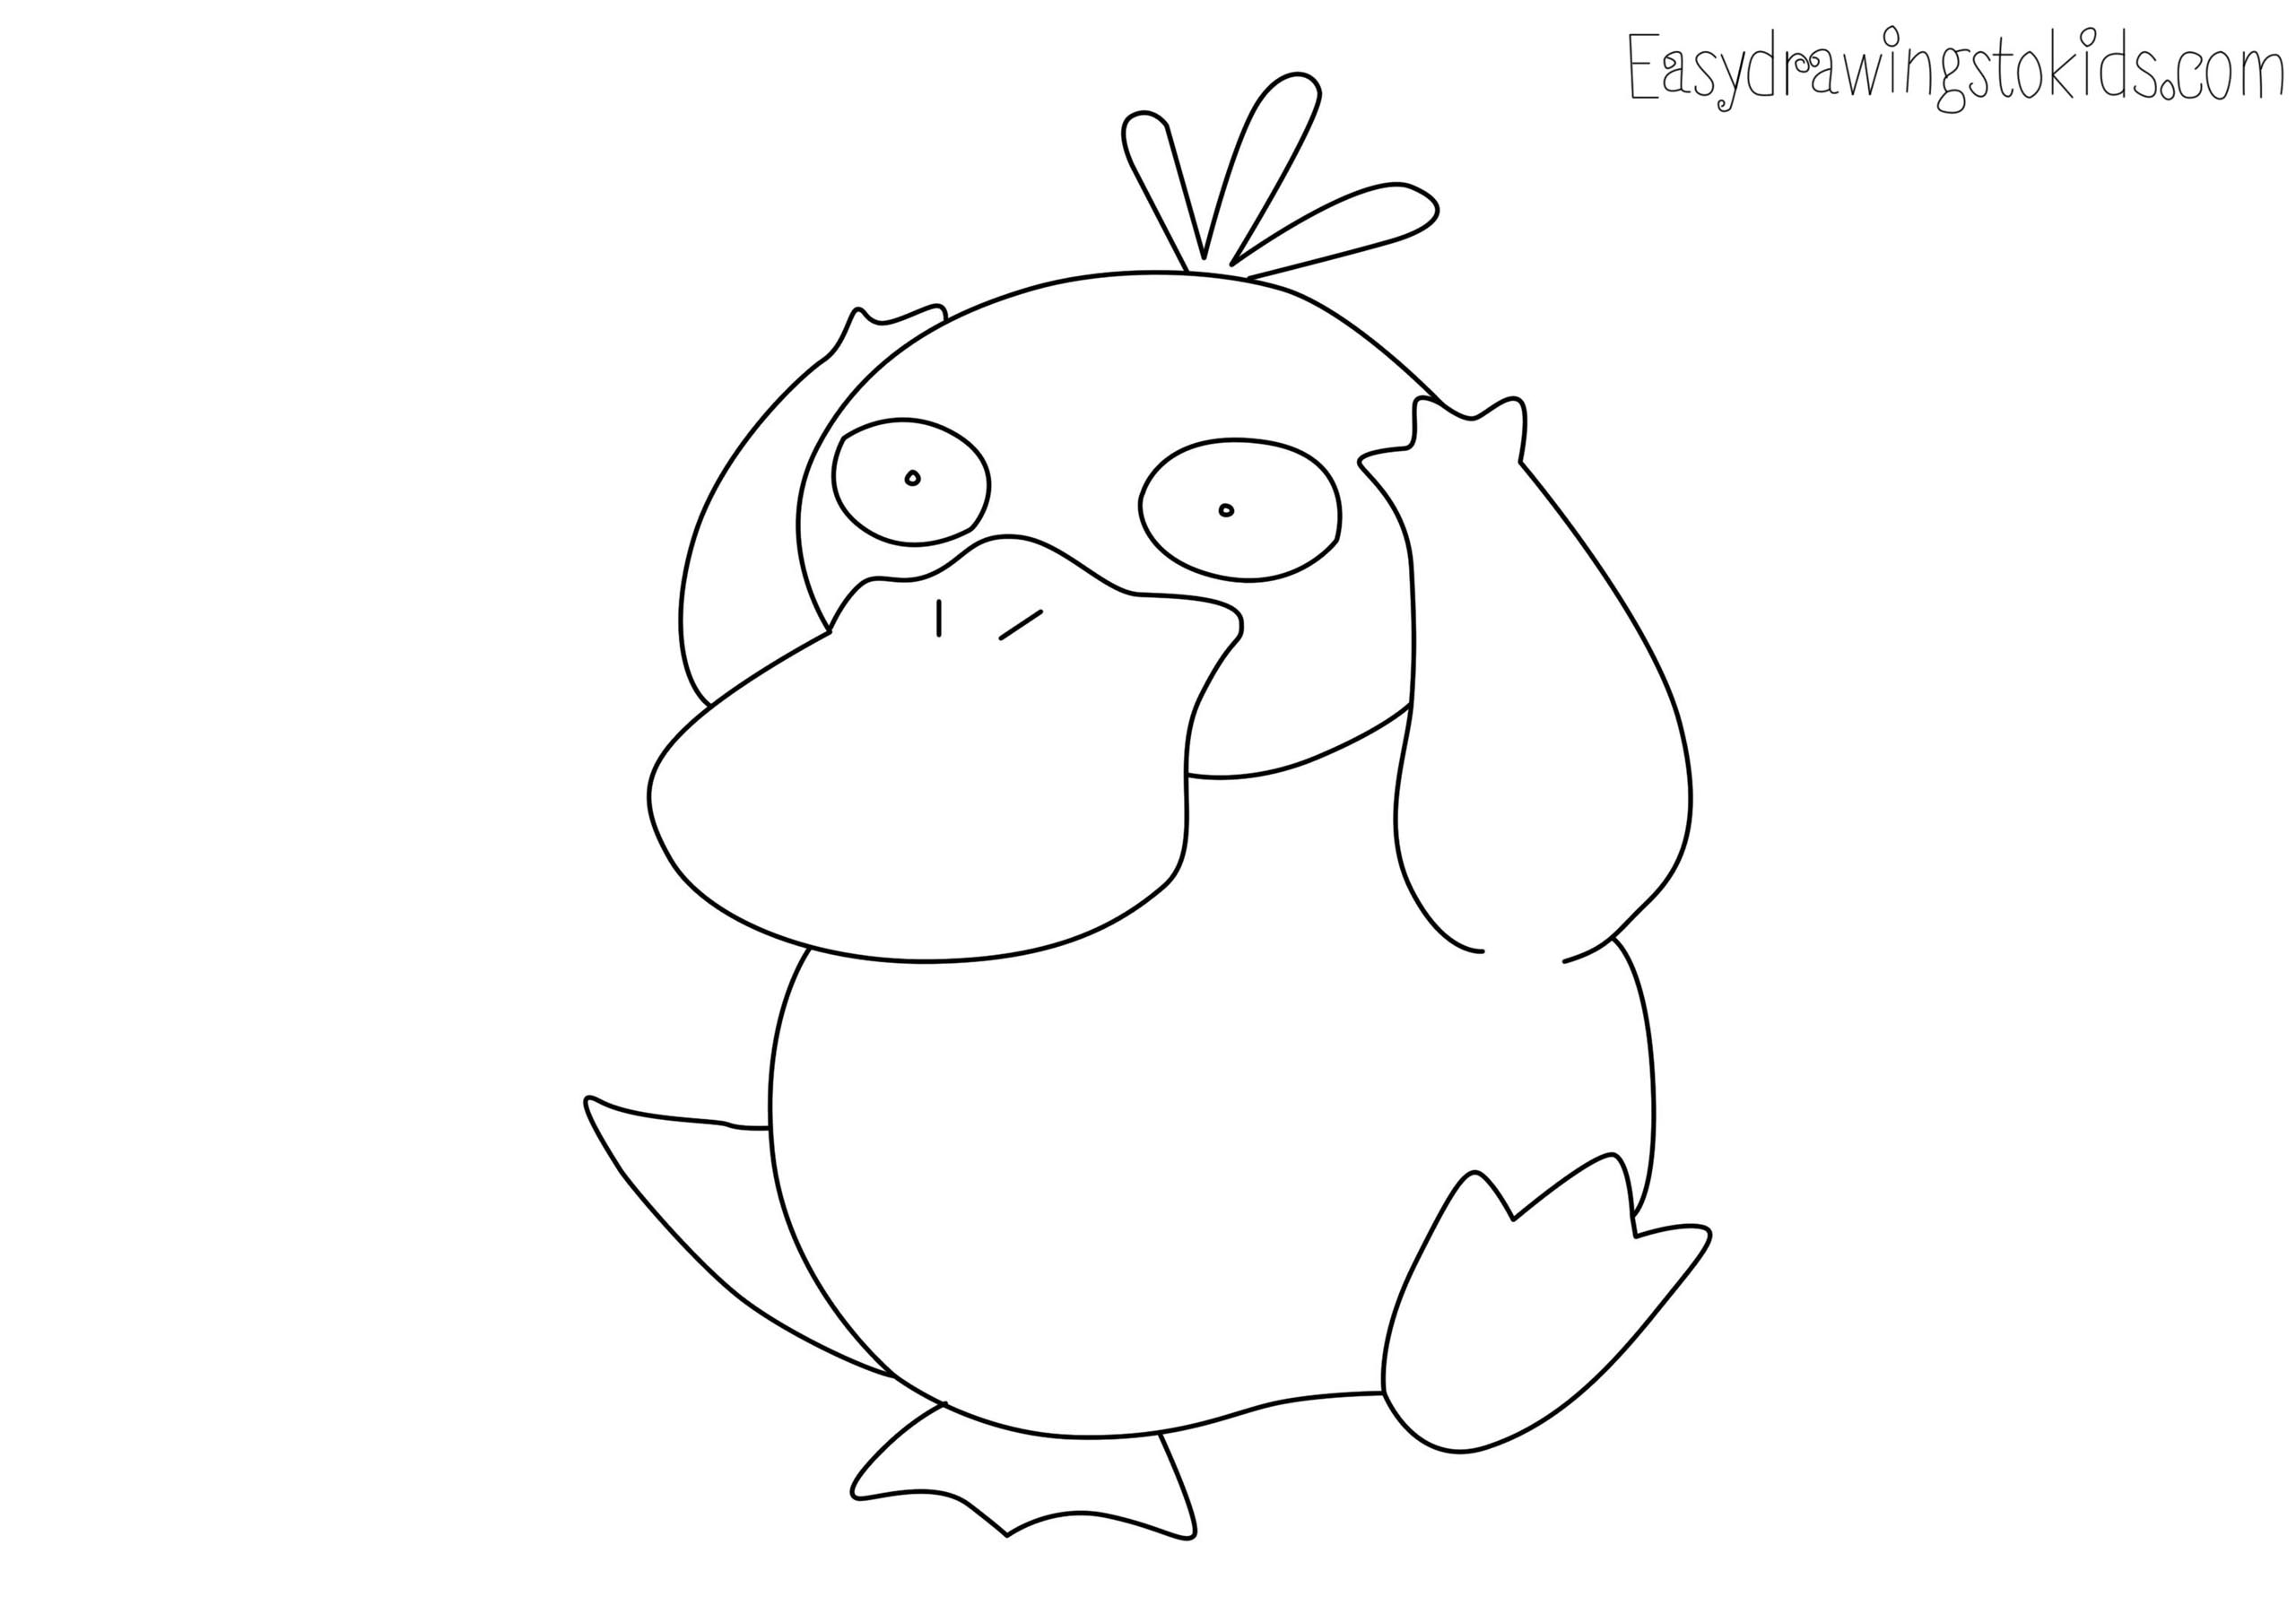 Psyduck Coloring Pages - Coloring Home